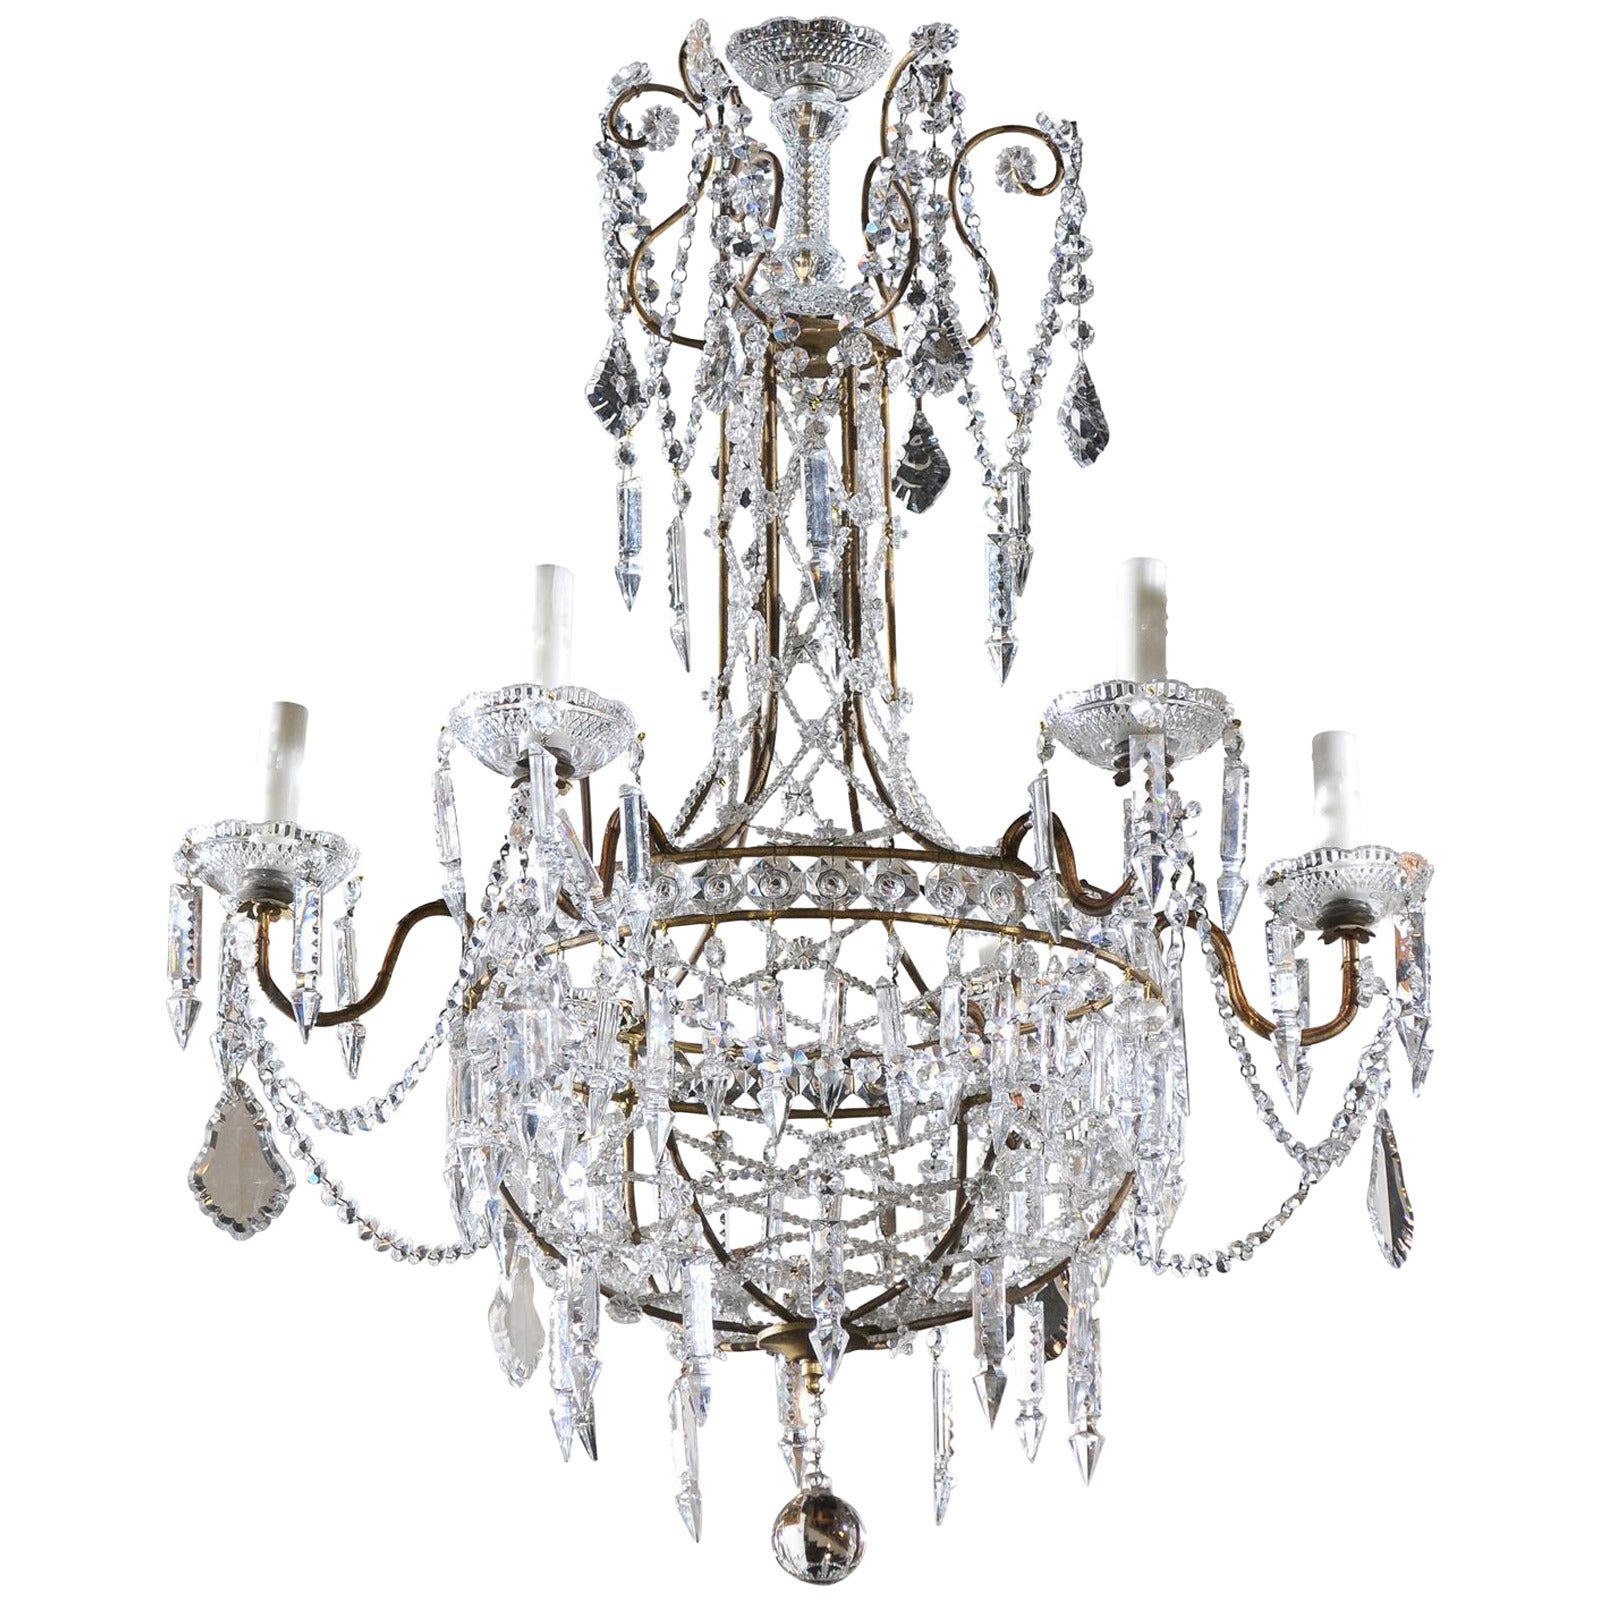 Italian Six-Light Crystal Basket Chandelier from the Early 20th Century For Sale